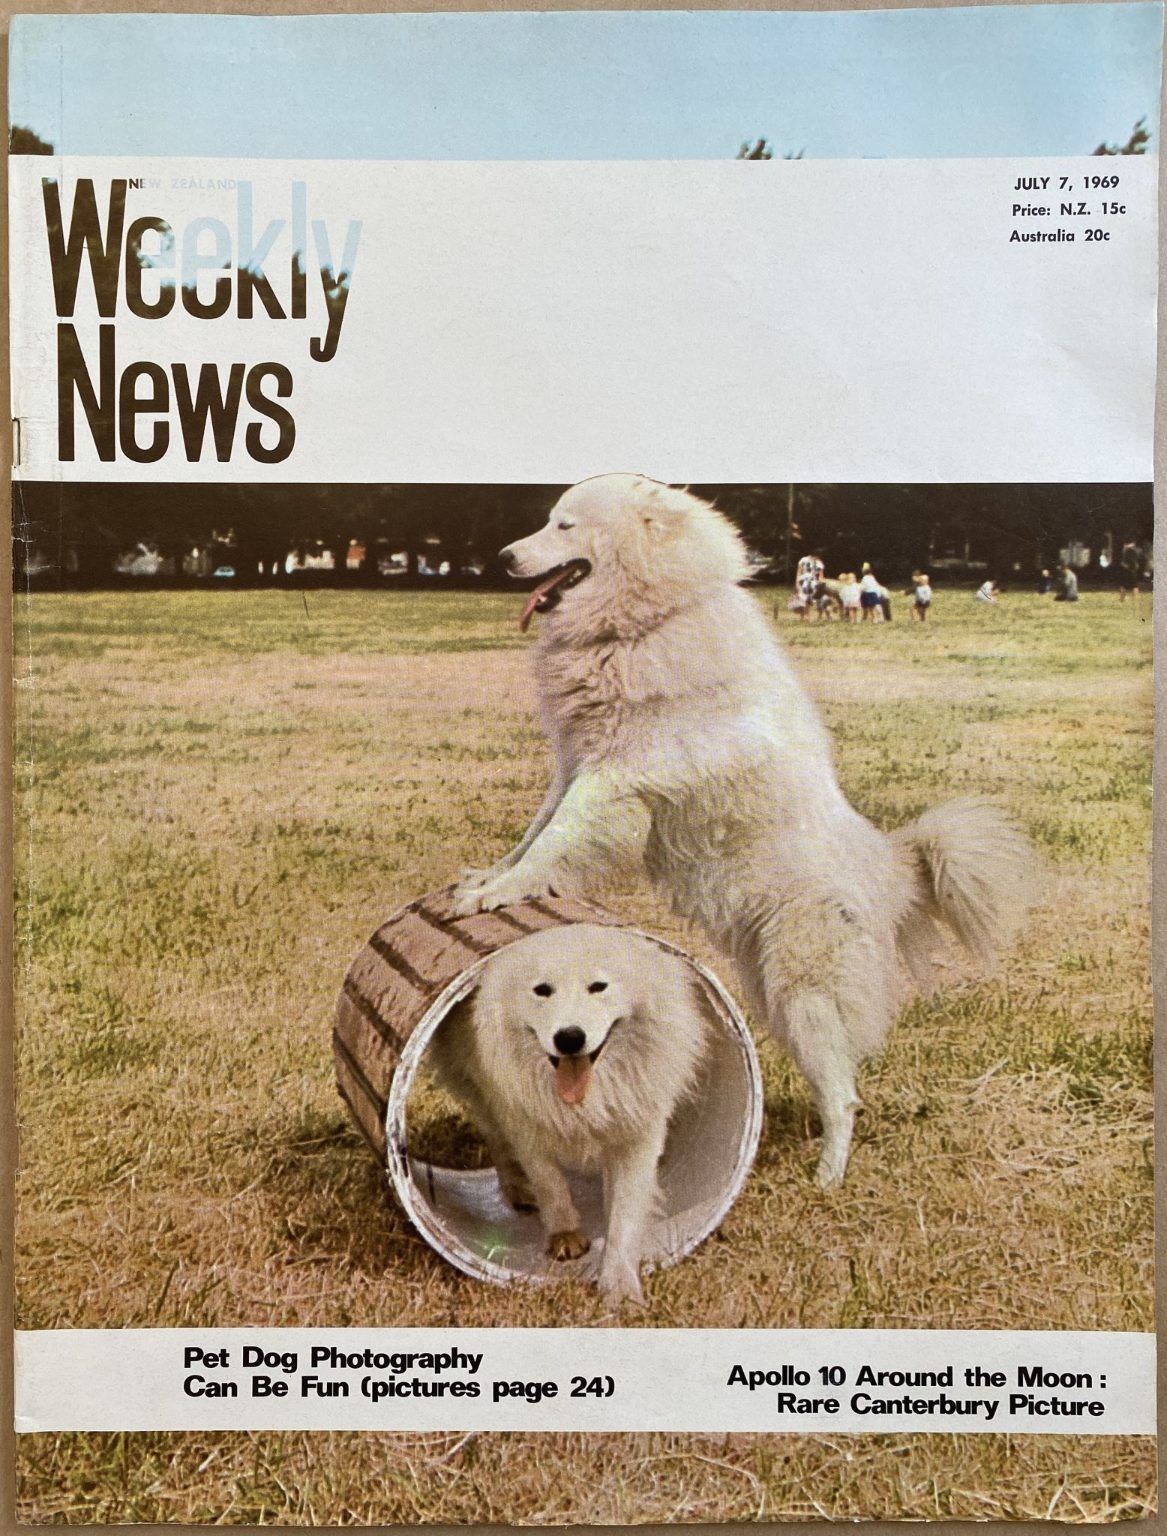 OLD NEWSPAPER: New Zealand Weekly News, No. 5510, 7 July 1969